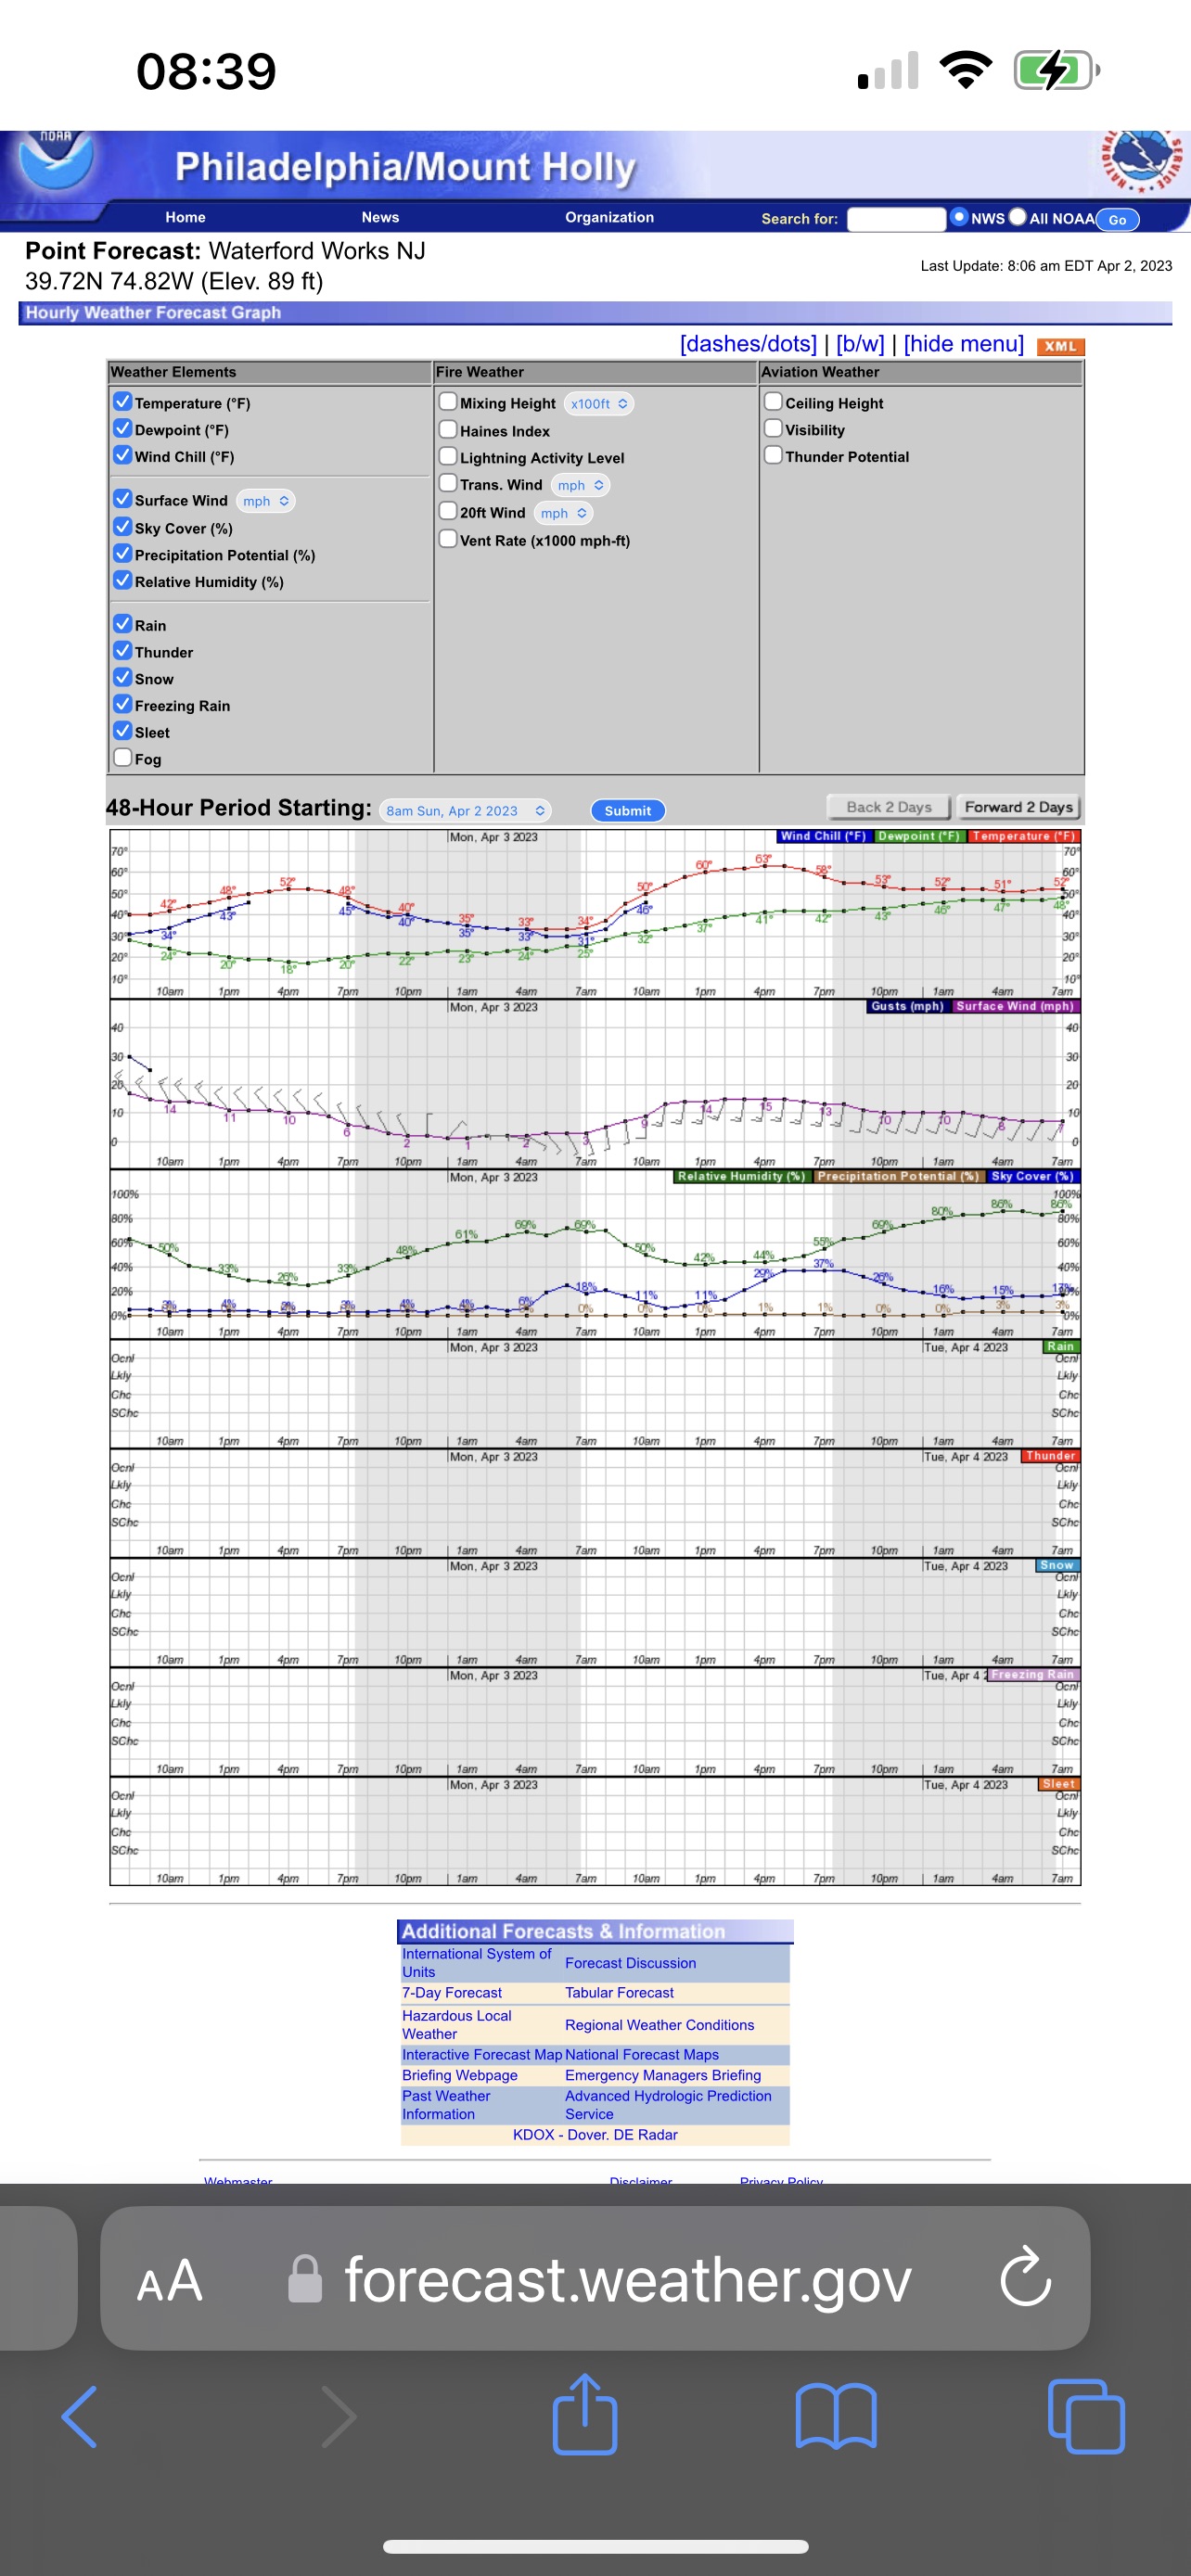 Hourly Graphical Forecast for 39.72N 74.82W (2).jpg